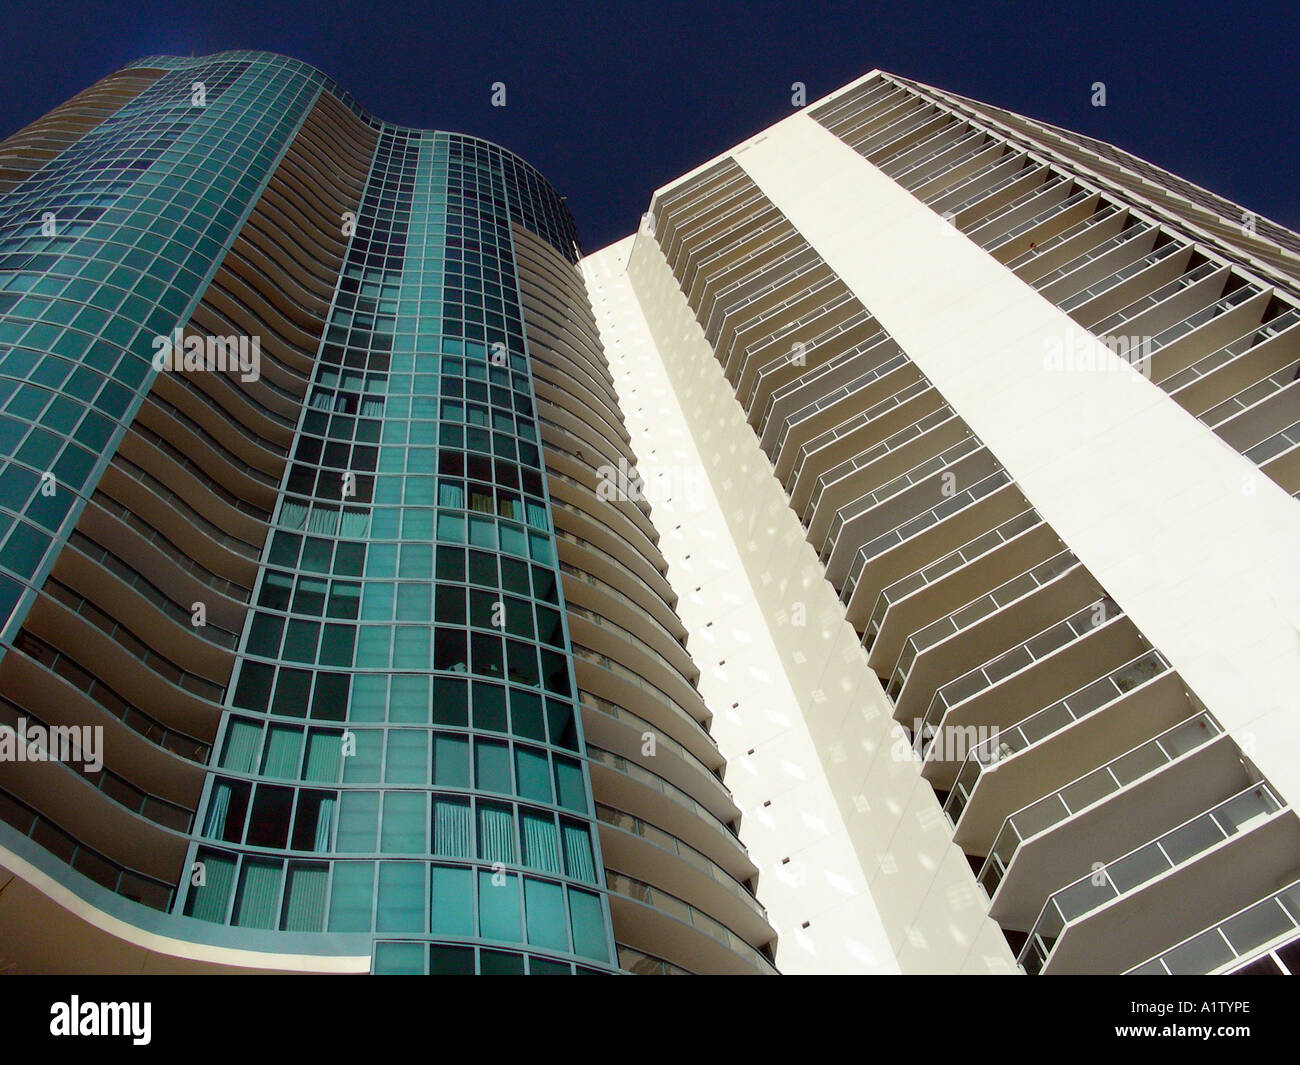 High rise buildings in Fort lauderdale, Florida USA damaged by hurricane Wilma Stock Photo